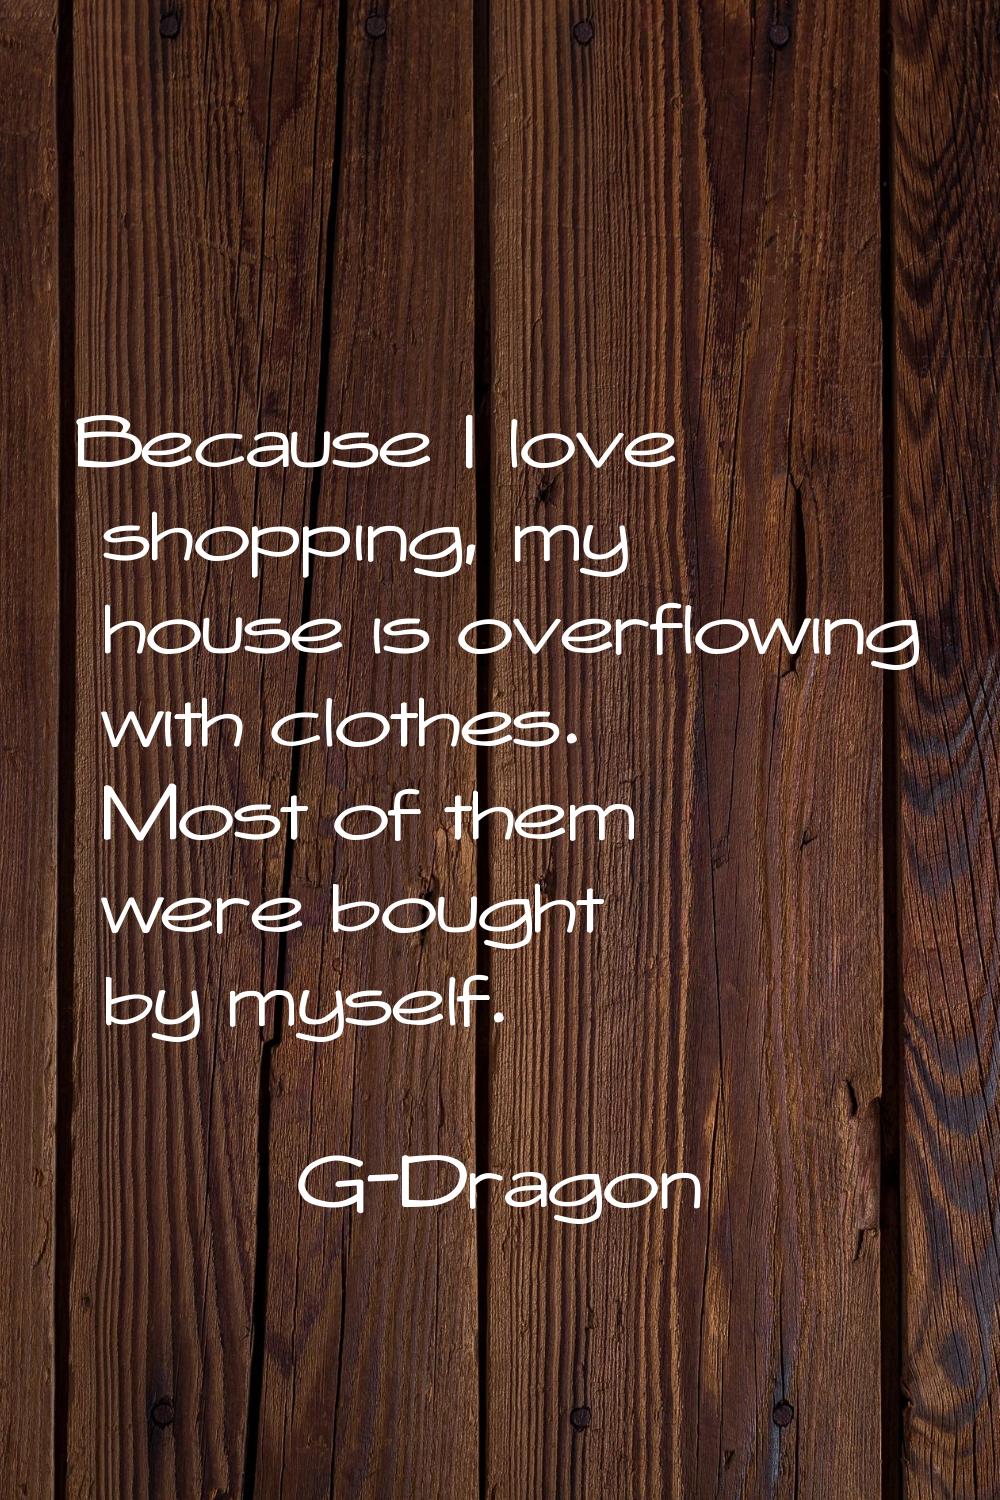 Because I love shopping, my house is overflowing with clothes. Most of them were bought by myself.